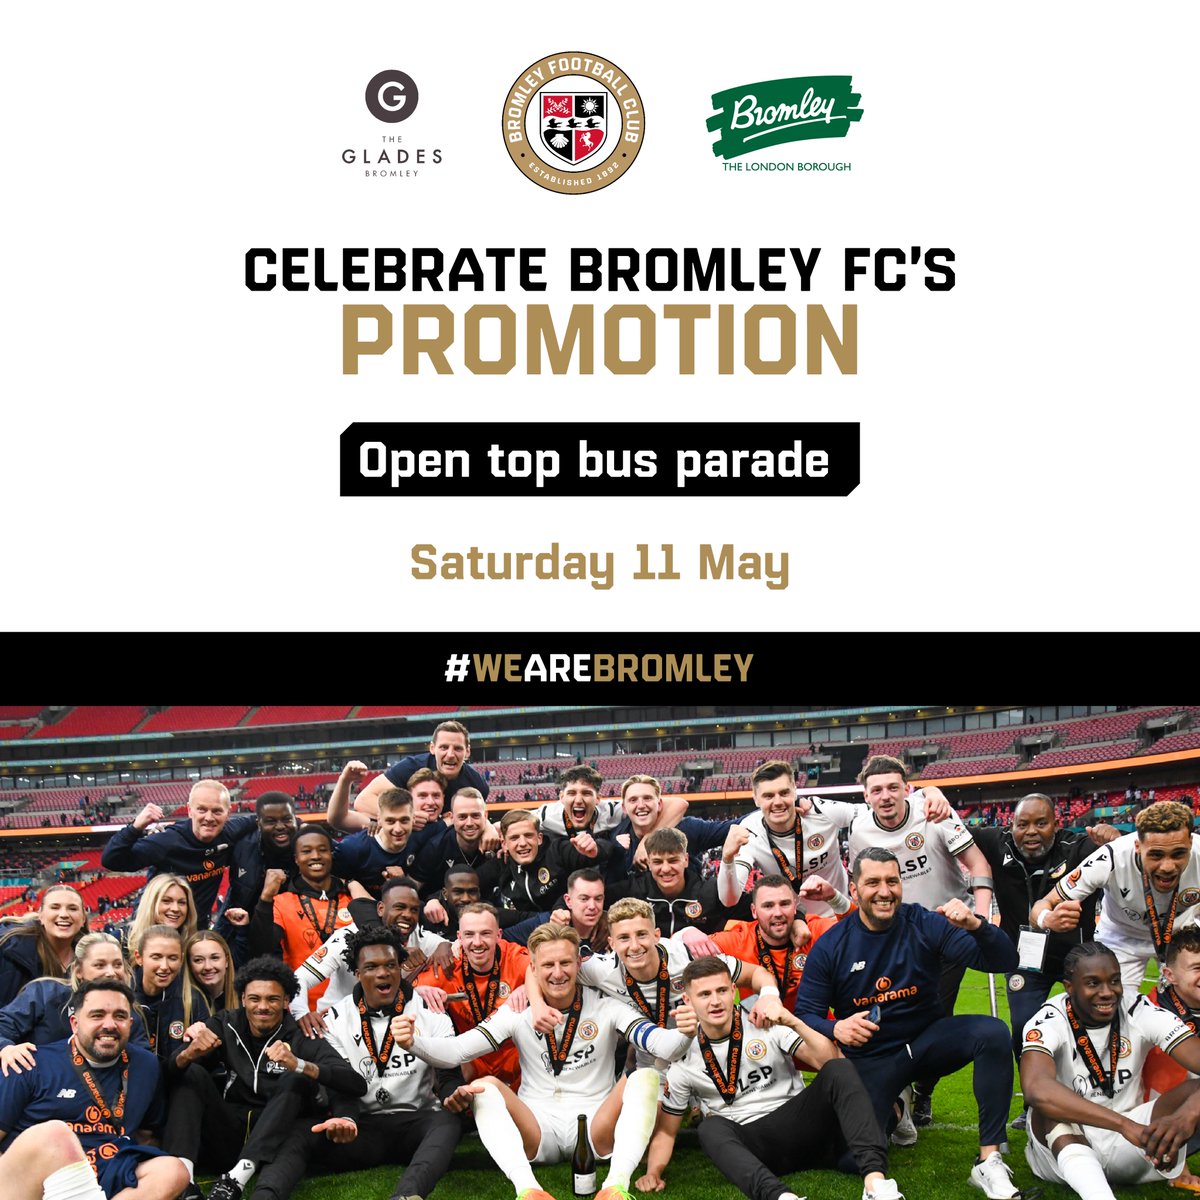 The celebrations continue this Saturday for @bromleyfc! The Mayor & Mayoress congratulated the team at Wembley for their incredible achievement on Sunday, and encourage fans to join for their bus parade in Bromley town centre. bromley.gov.uk/news/article/6… #WeAreBromley #ProudOfBromley